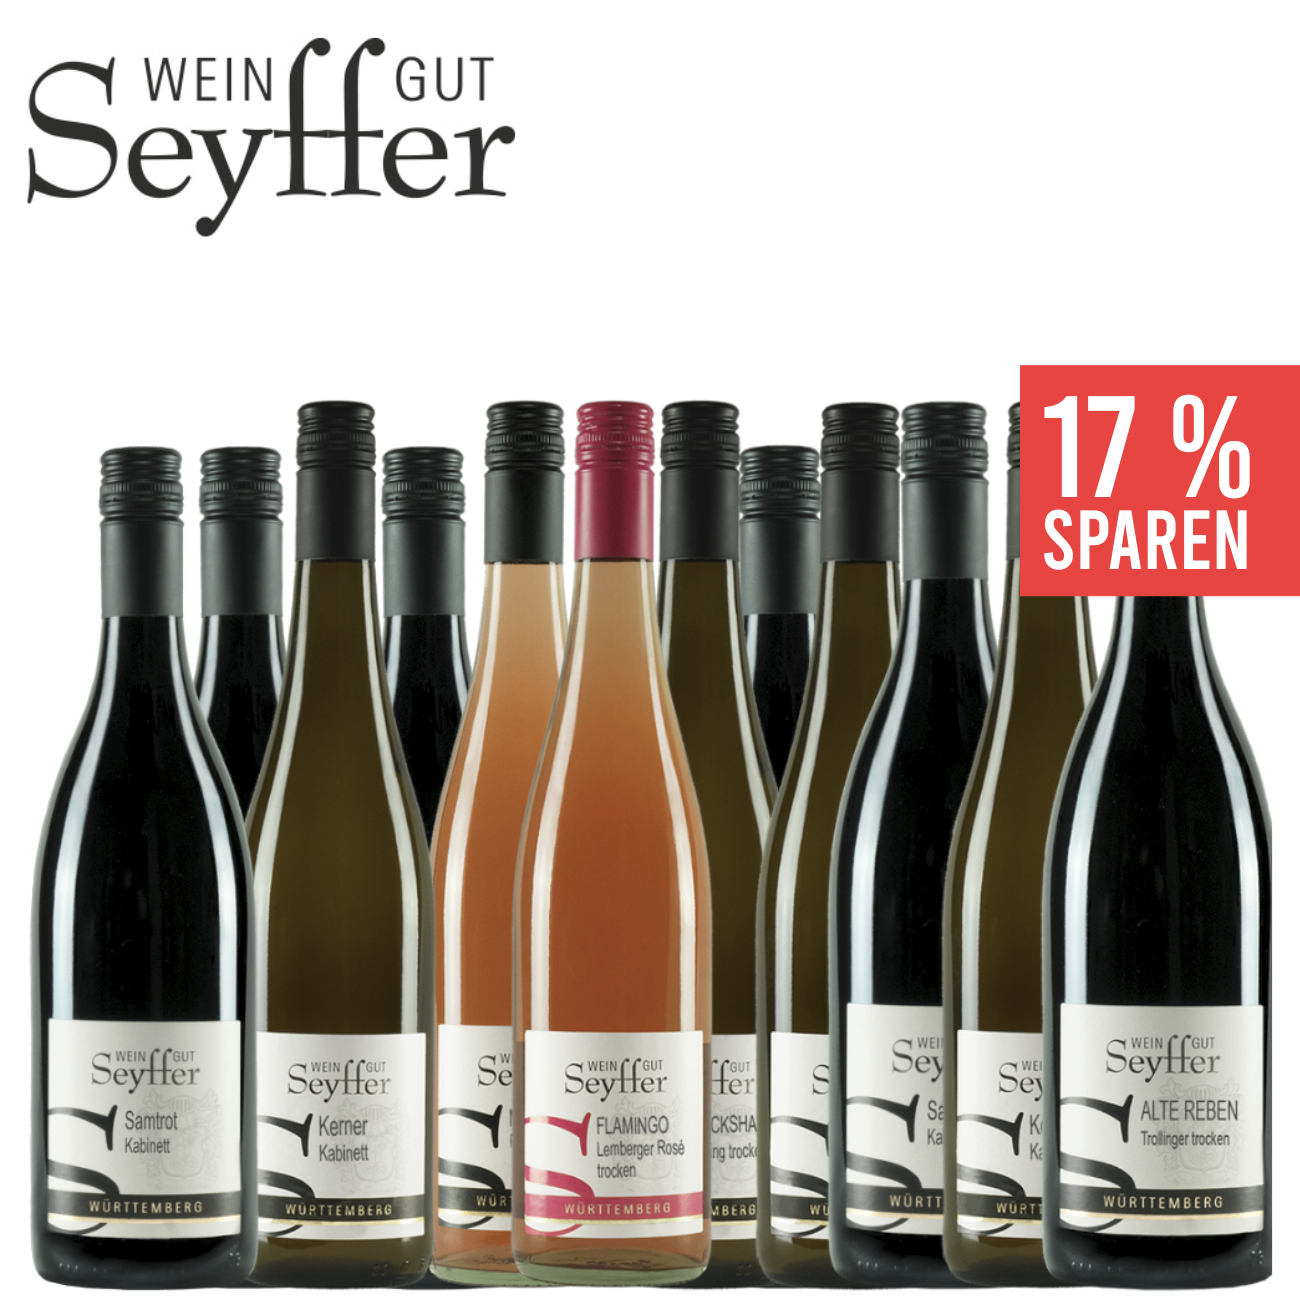 wein.plus find+buy: The wein.plus wines of | members our find+buy